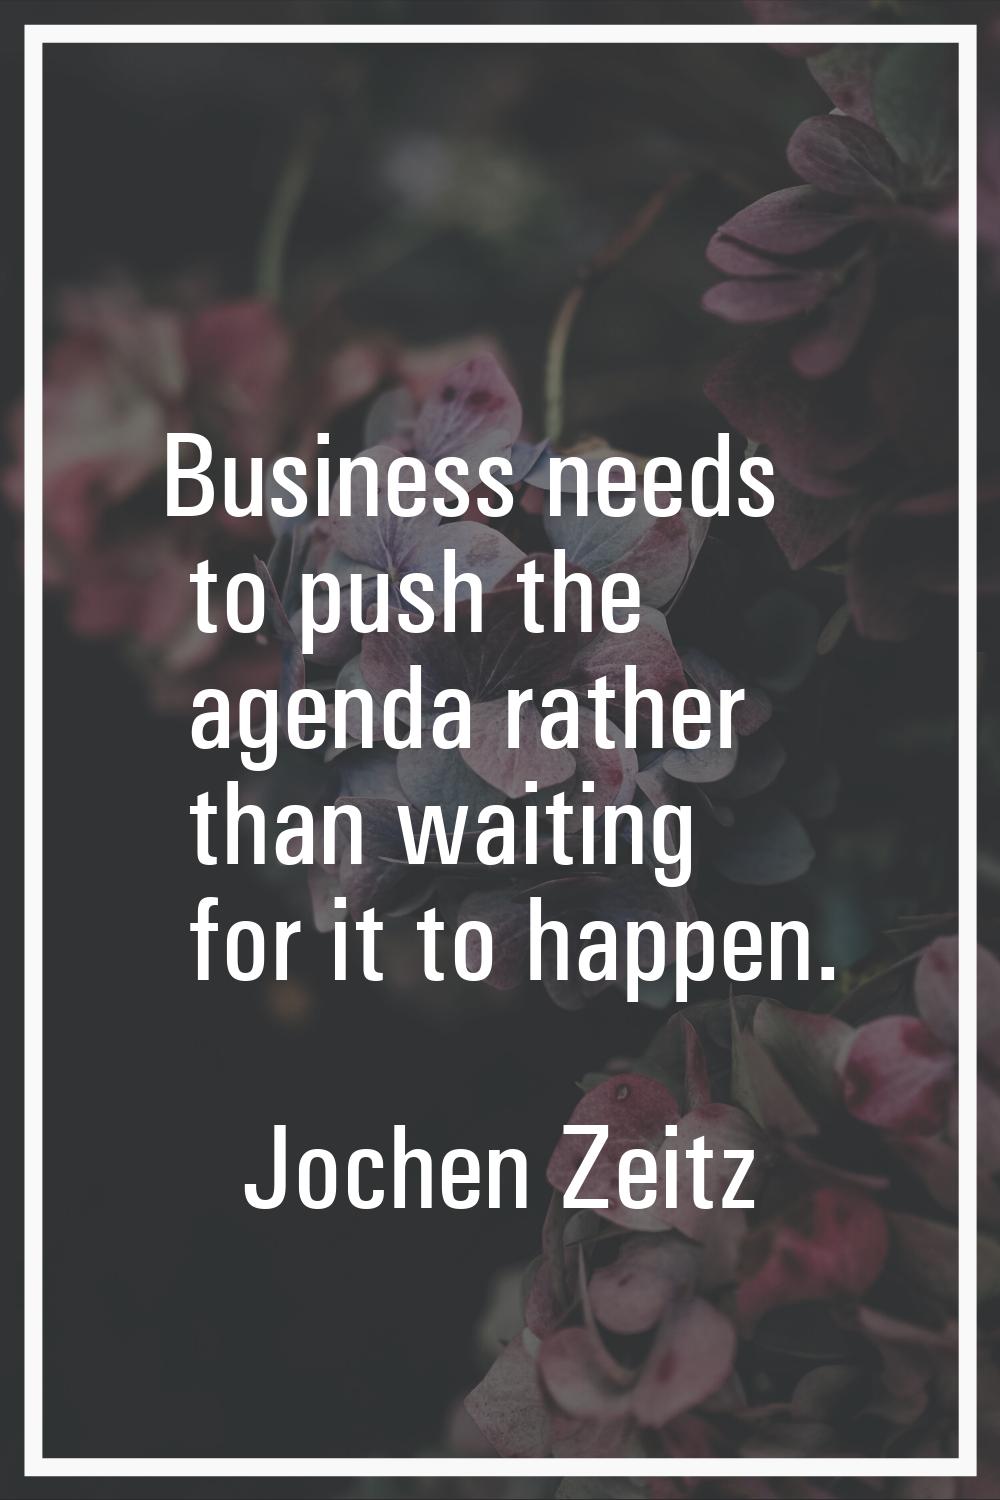 Business needs to push the agenda rather than waiting for it to happen.